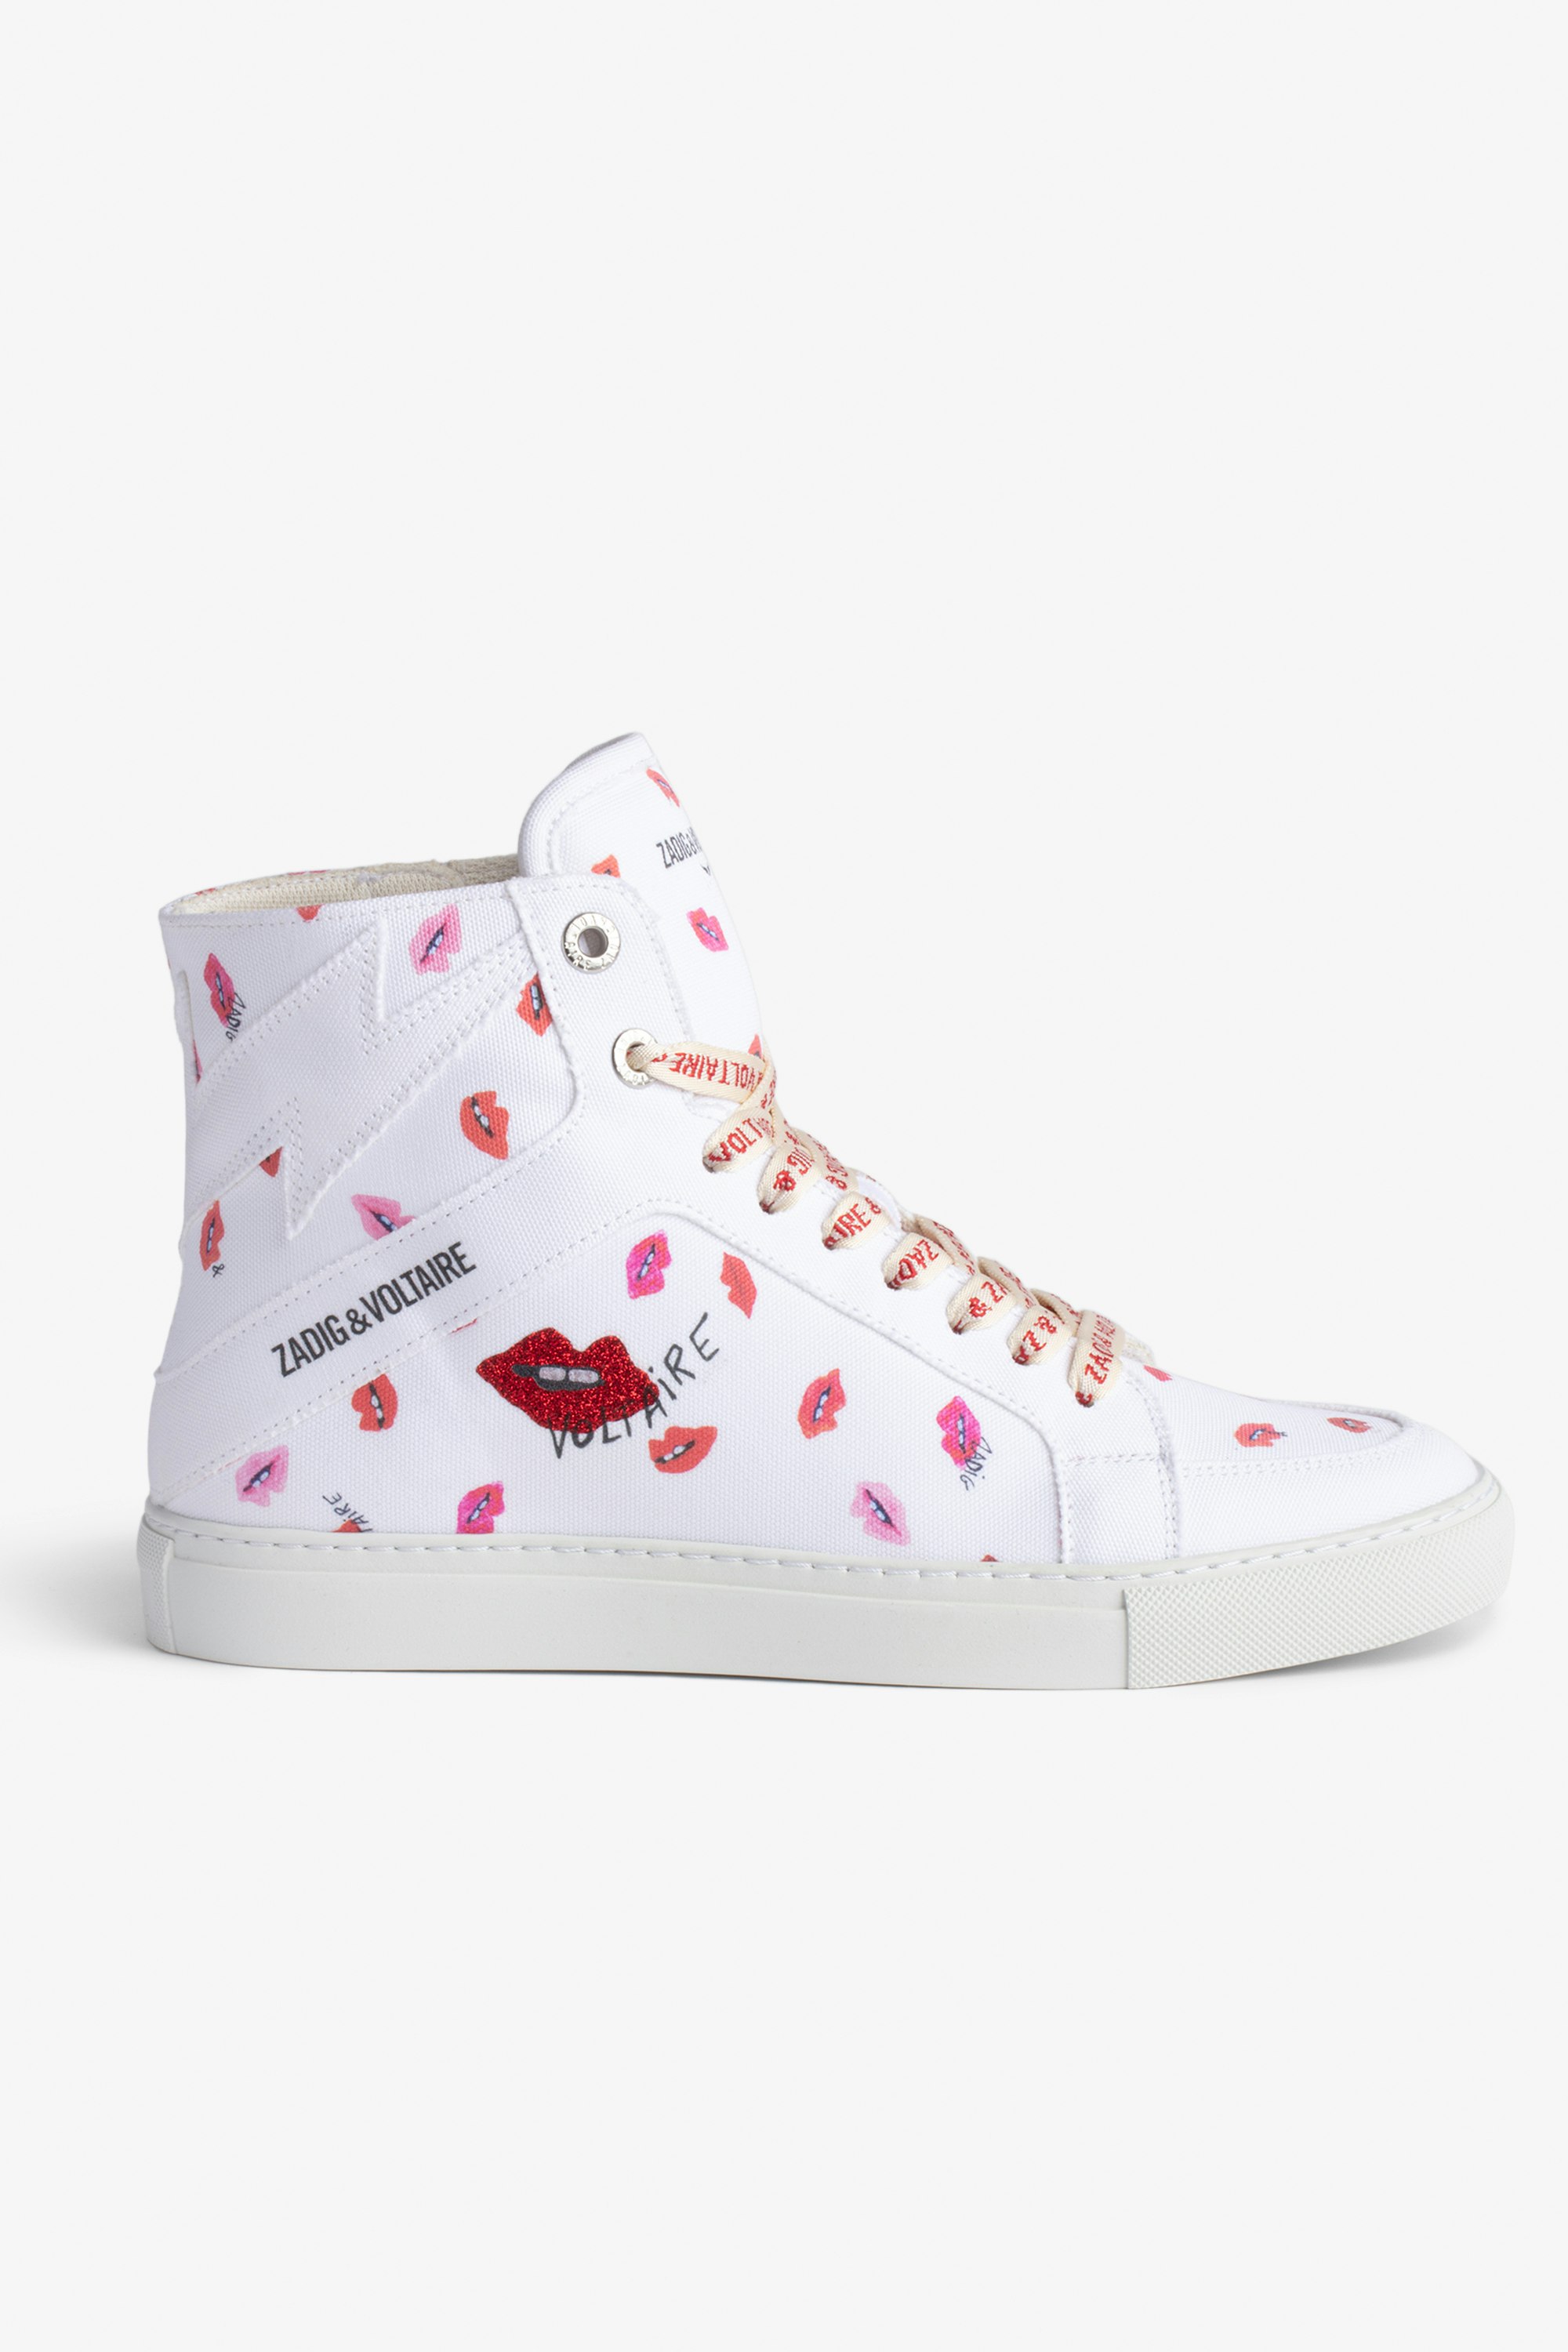 ZV1747 High Flash High-Top Trainers Women's ZV high-top trainers in white canvas with lips motifs